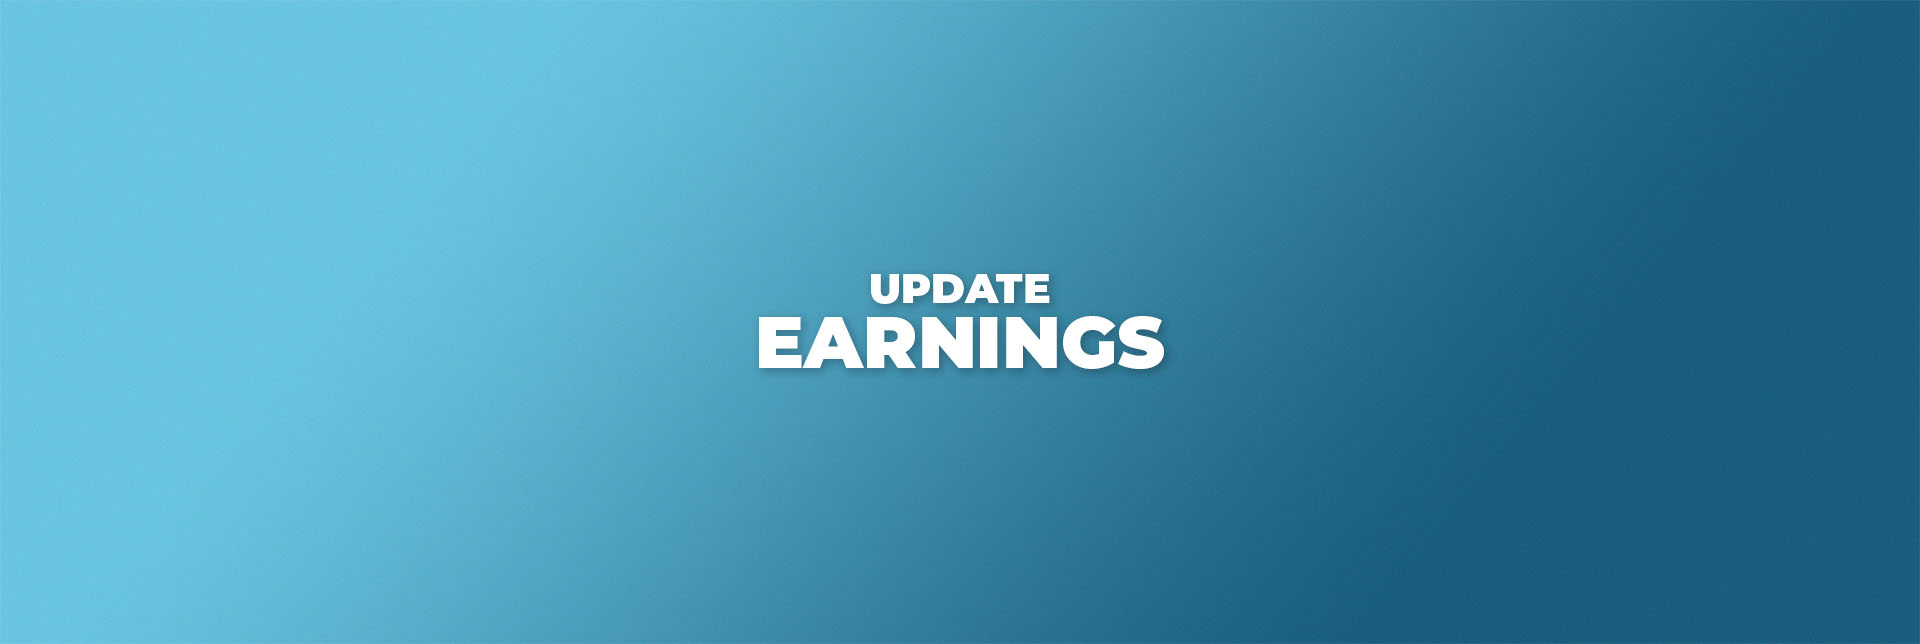 Bulk update the earning amounts for Collaborators&#8217; products